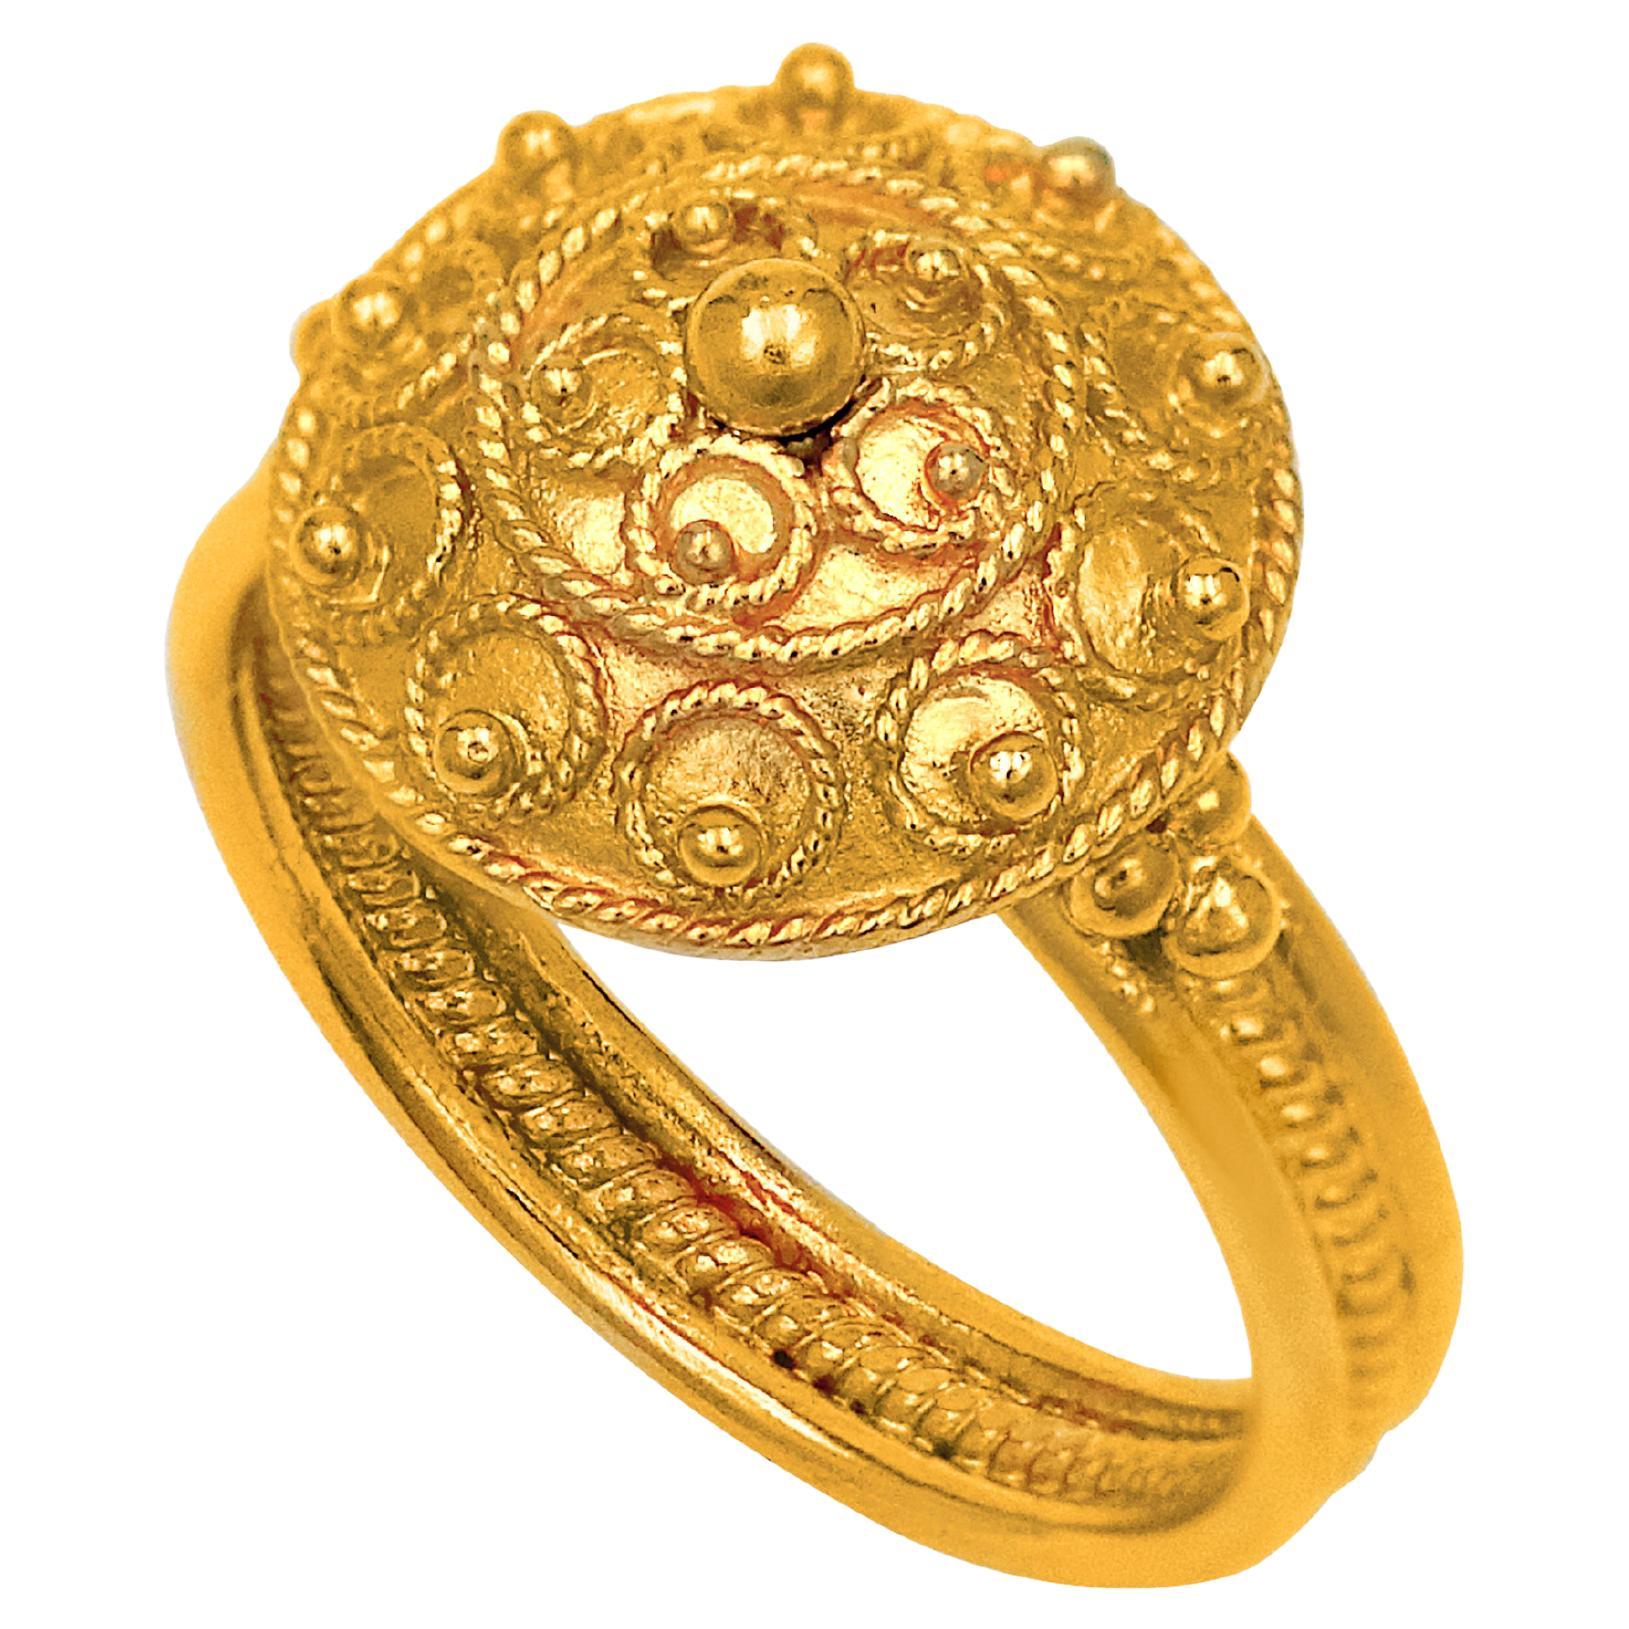 Infinity Spiral Ring in 22k gold – Greek Island House